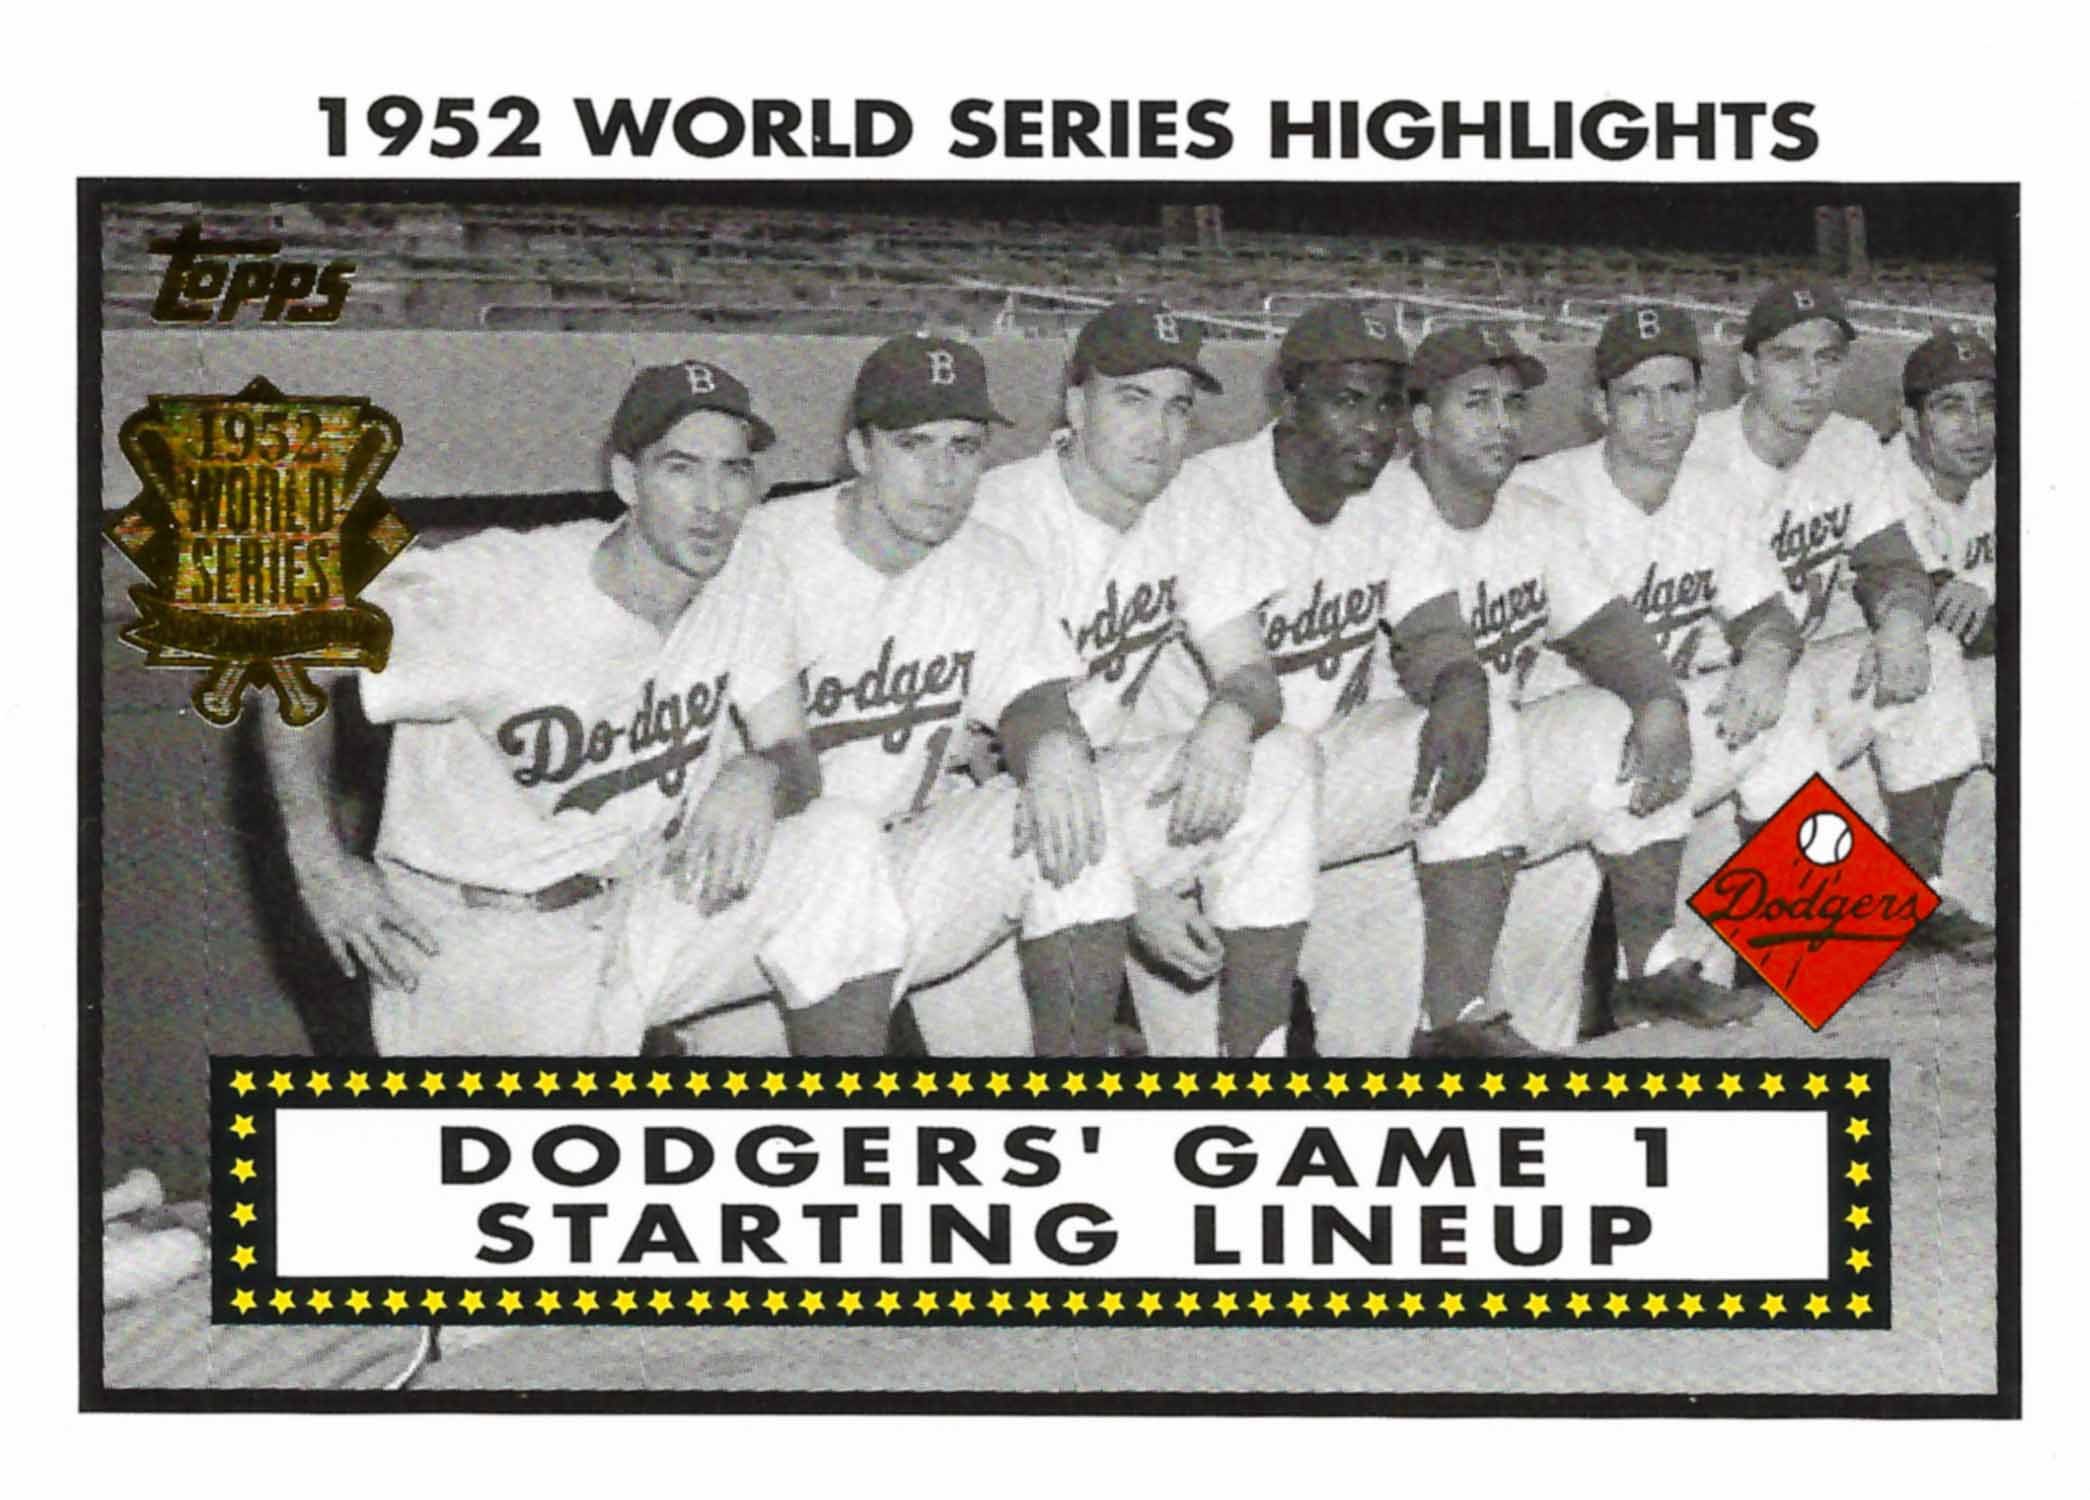 2002 Topps '52 World Series Highlights Dodgers Line Up